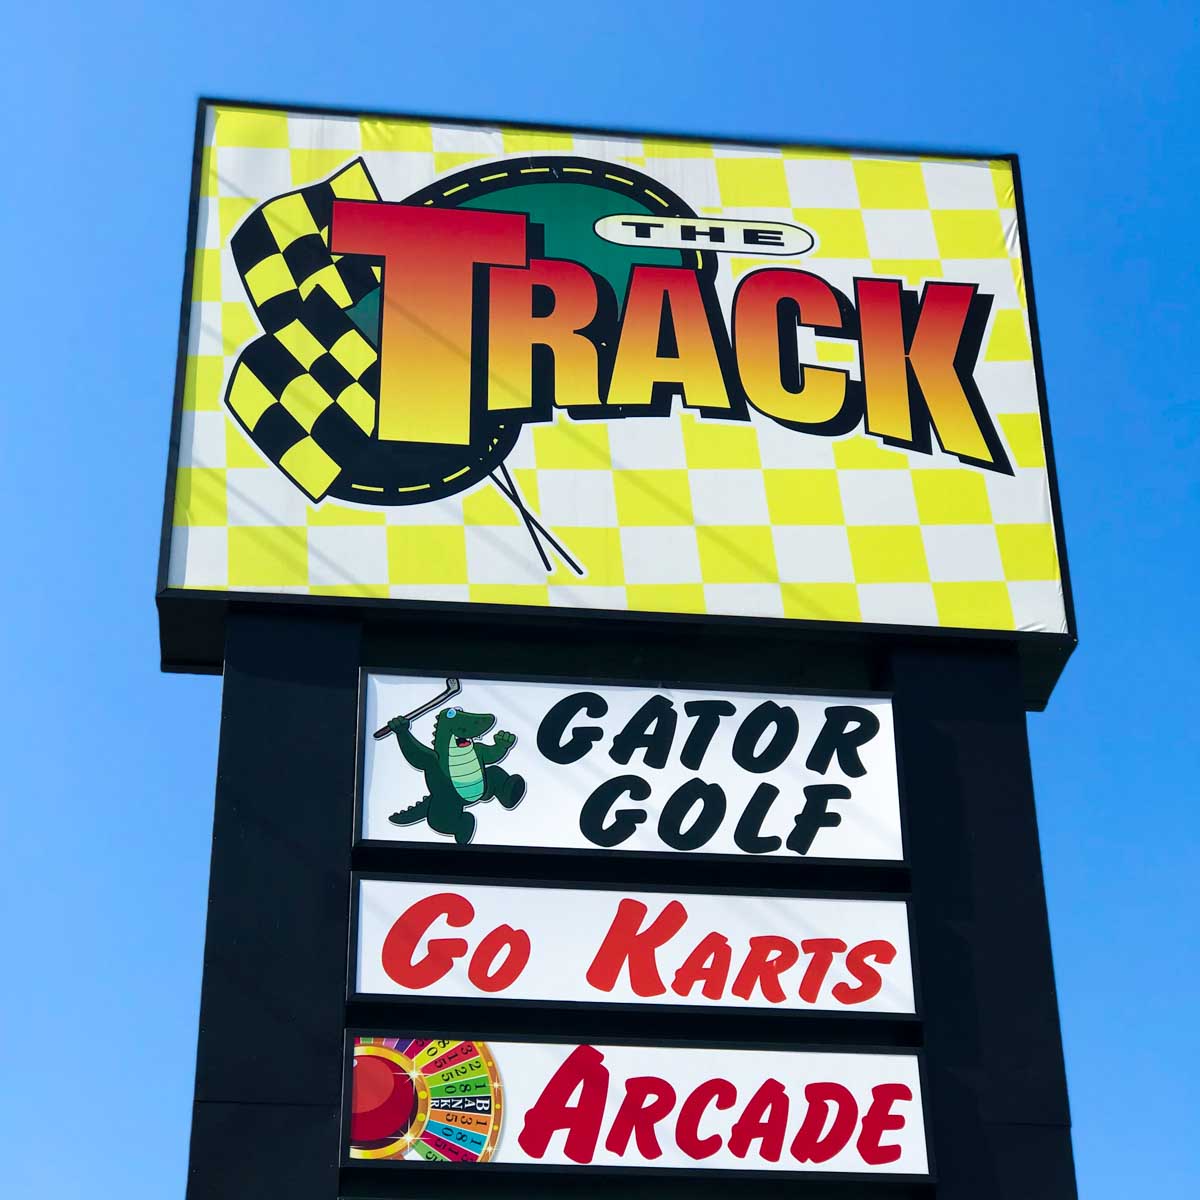 The welcome sign at The Track.